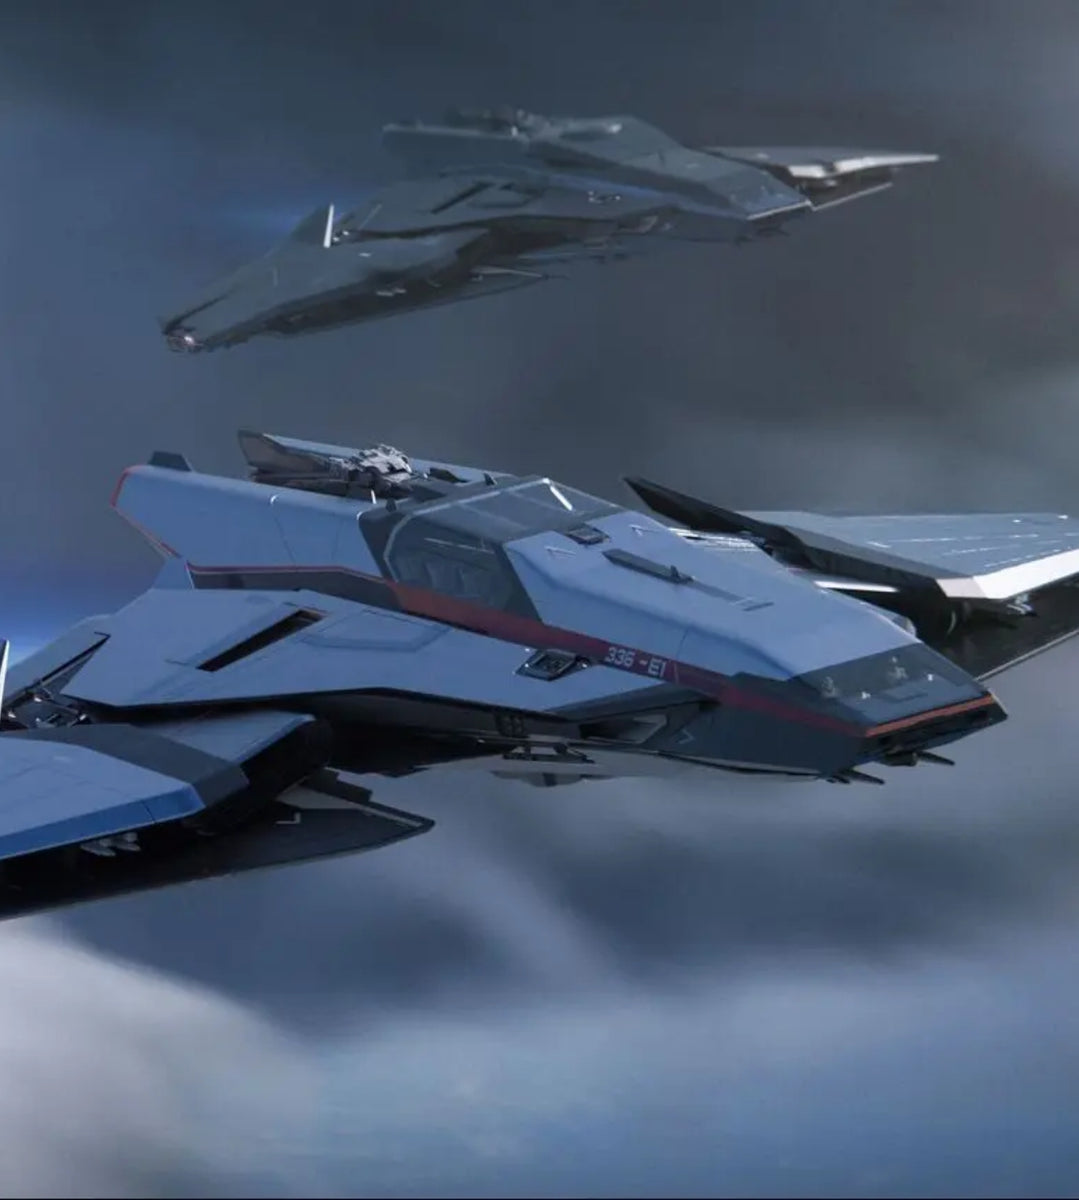 Star Citizen - The New Crusader Spirit Concept Ships Are AWESOME!